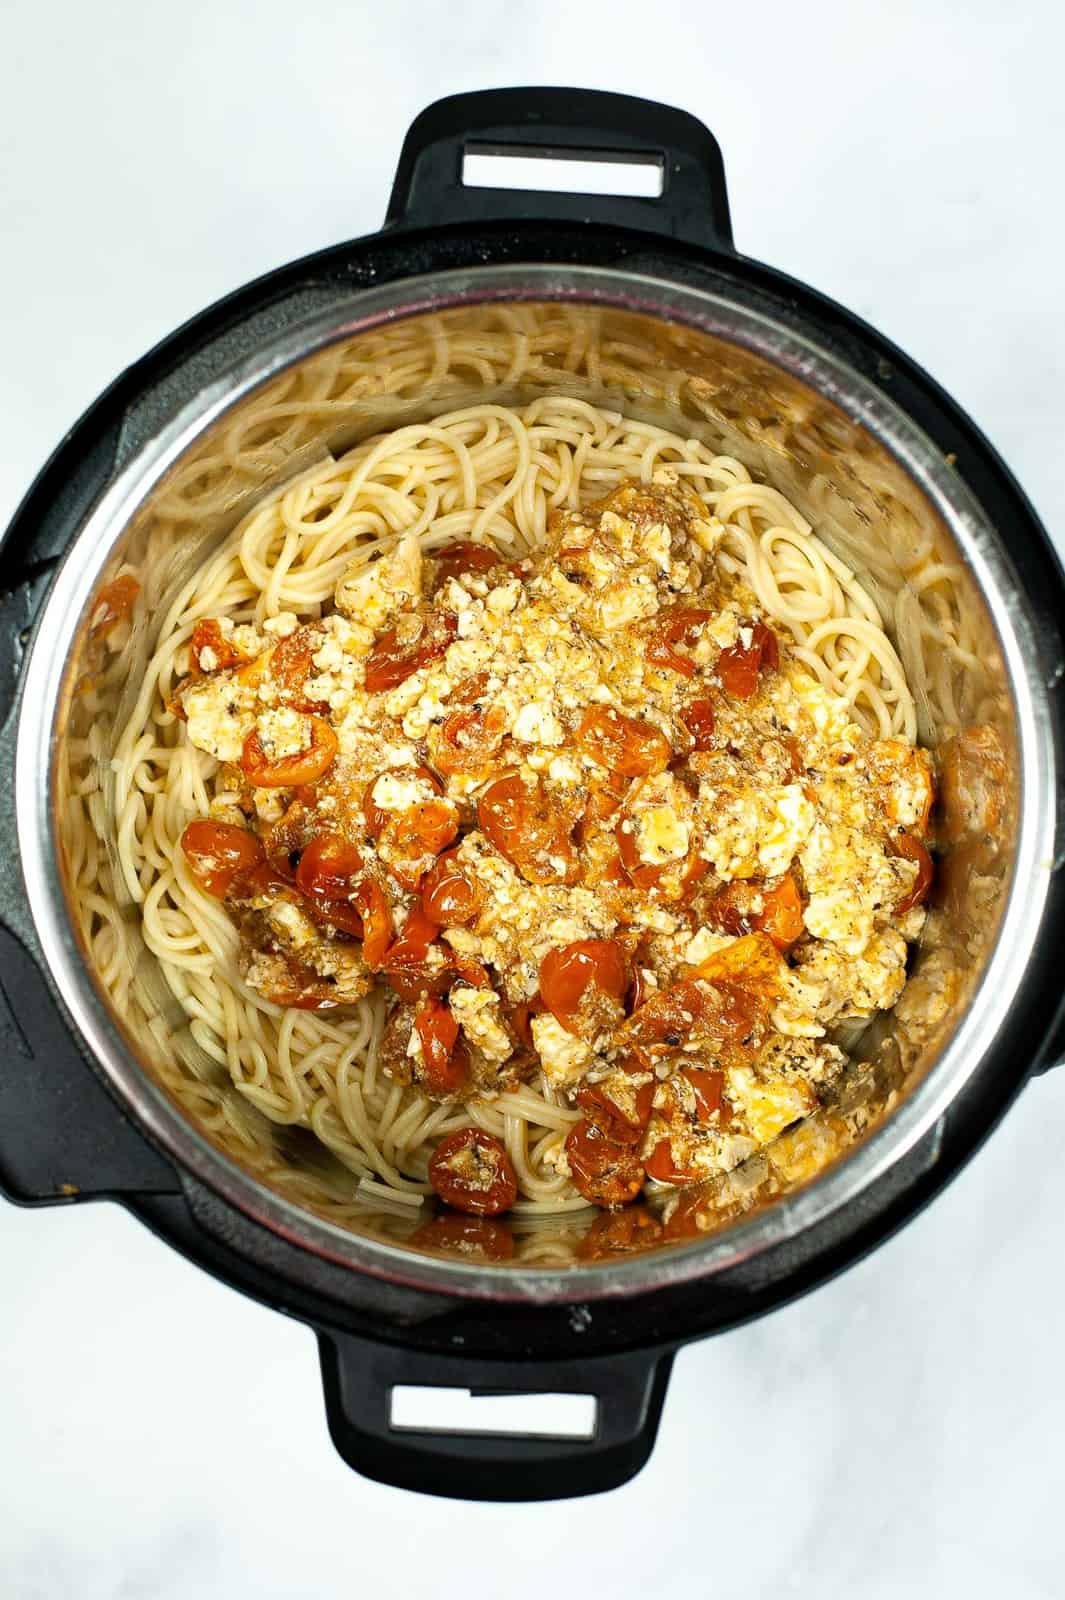 Mixing cooked spaghetti in the Instant Pot with baked feta.